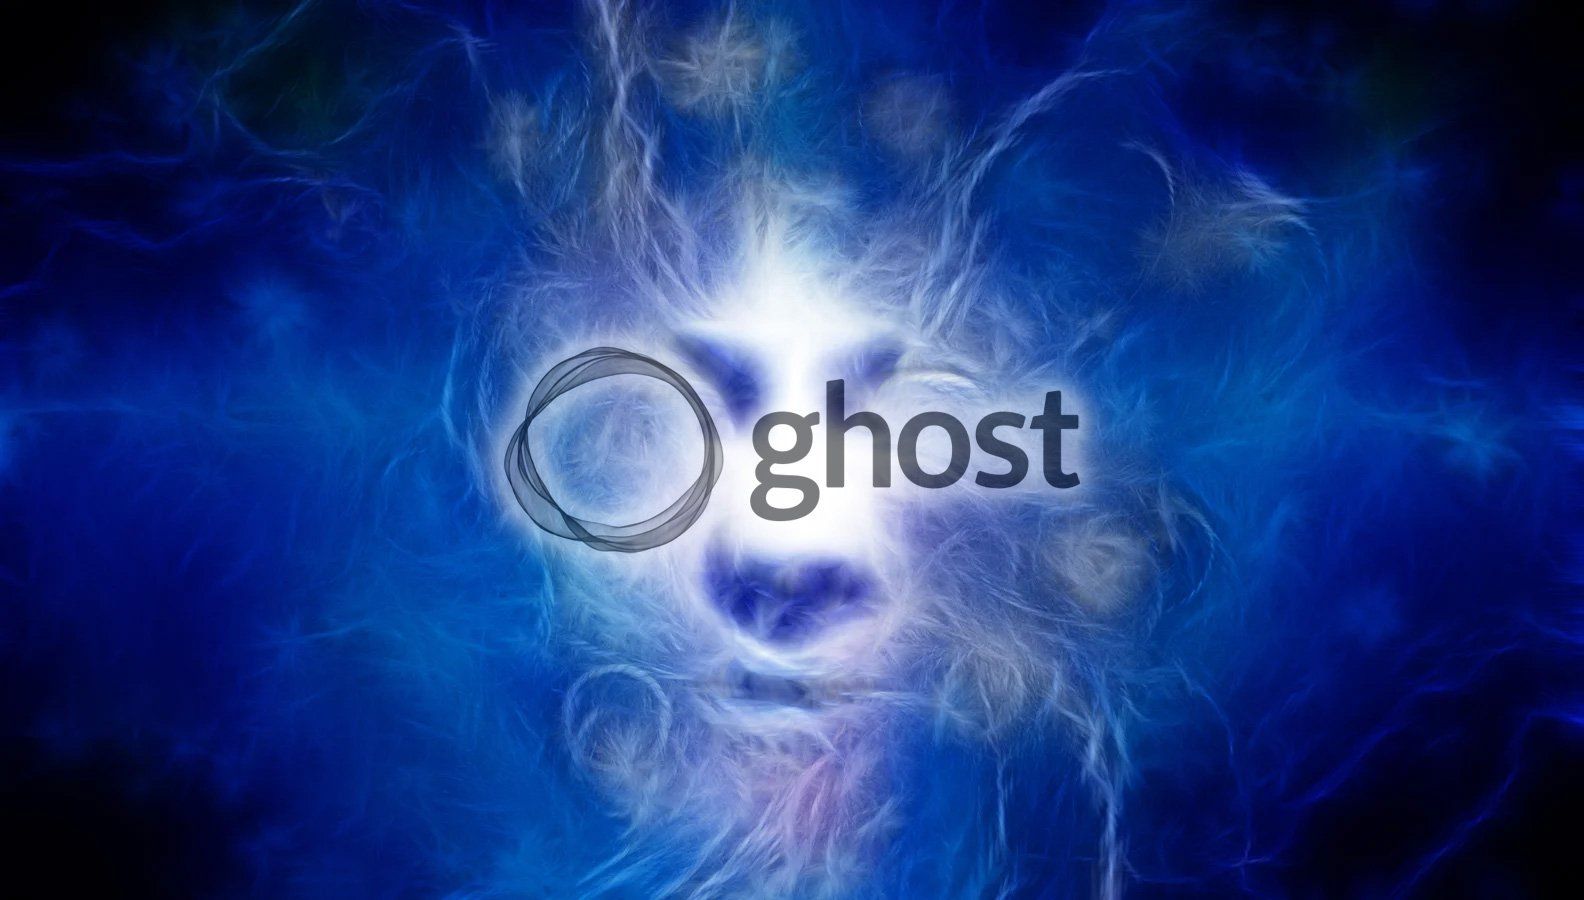 Ghost CMS logo over a ghostly figure